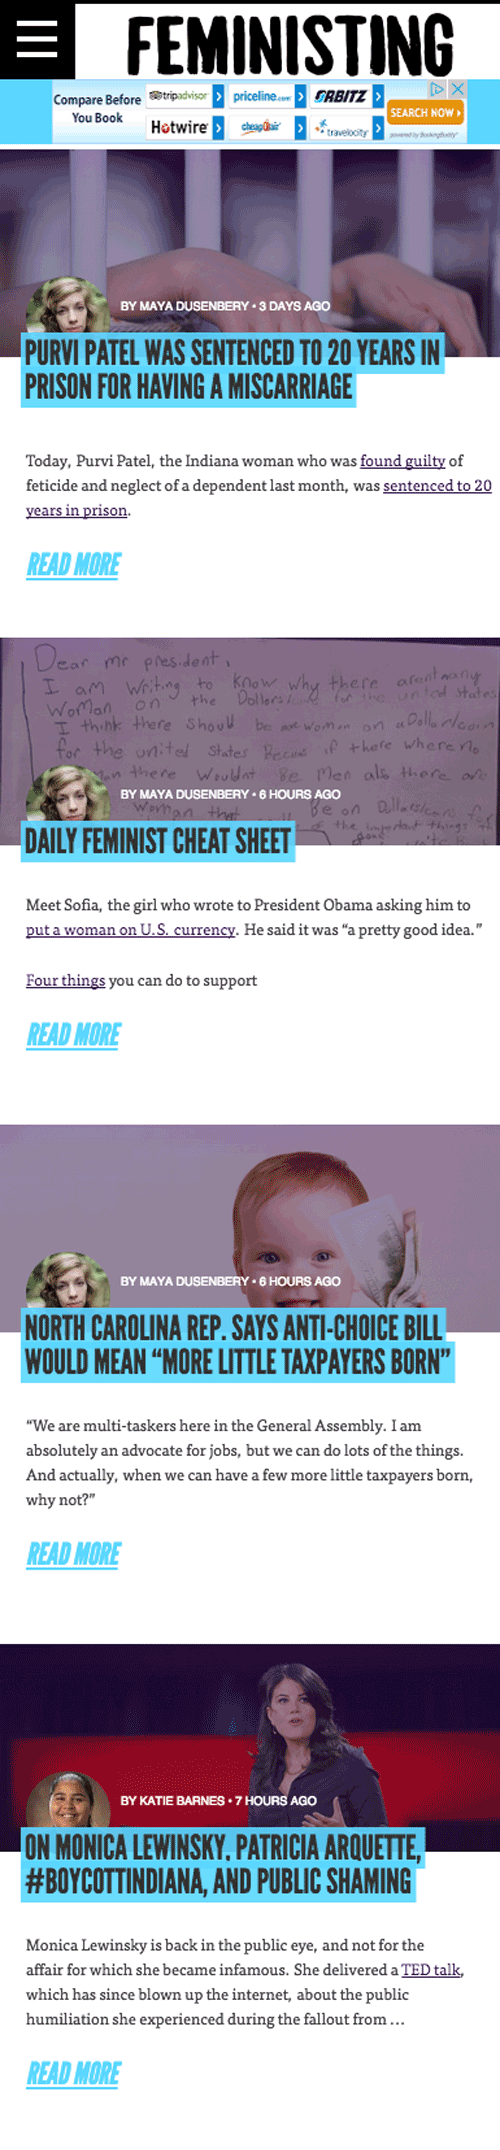 Mobile view of Feministing website